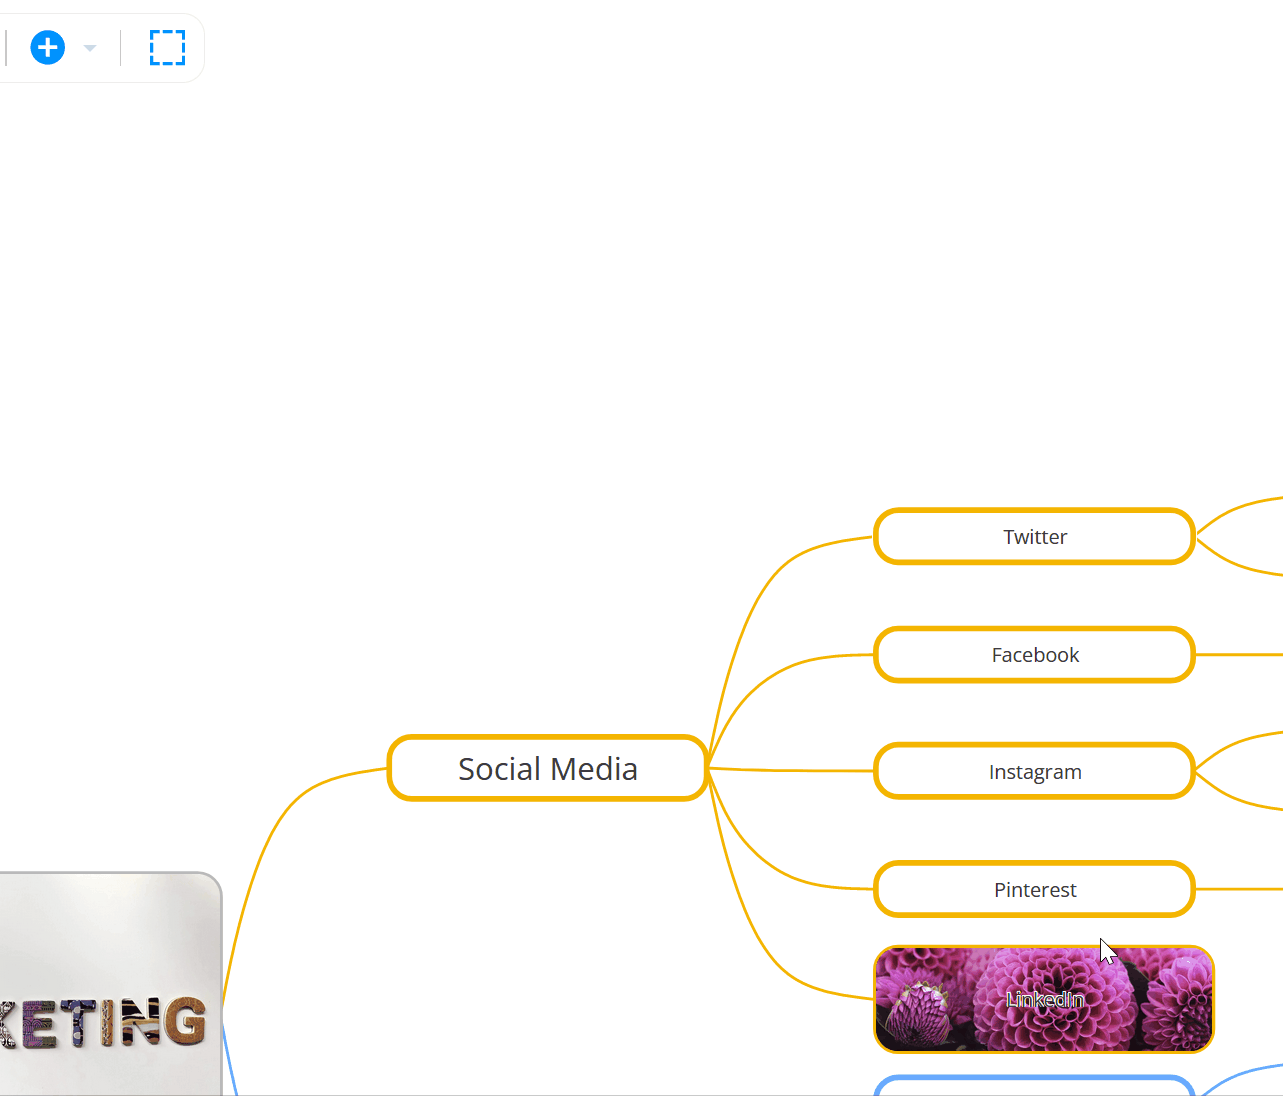 Formatting category using the multi-select toolbar.